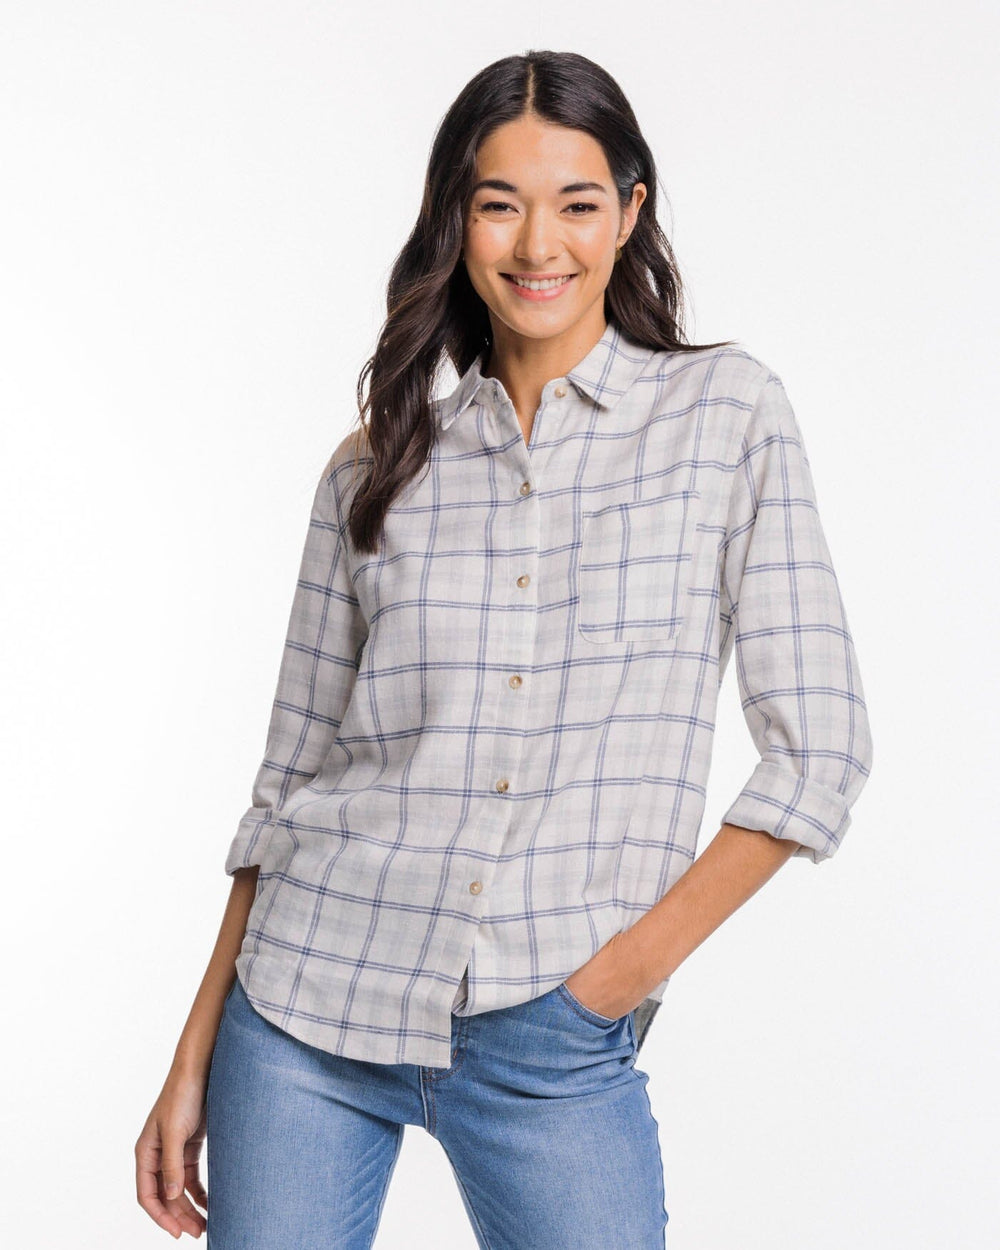 The front view of the Southern Tide Niki Chilly Morning Plaid Shirt by Southern Tide - Marshmallow